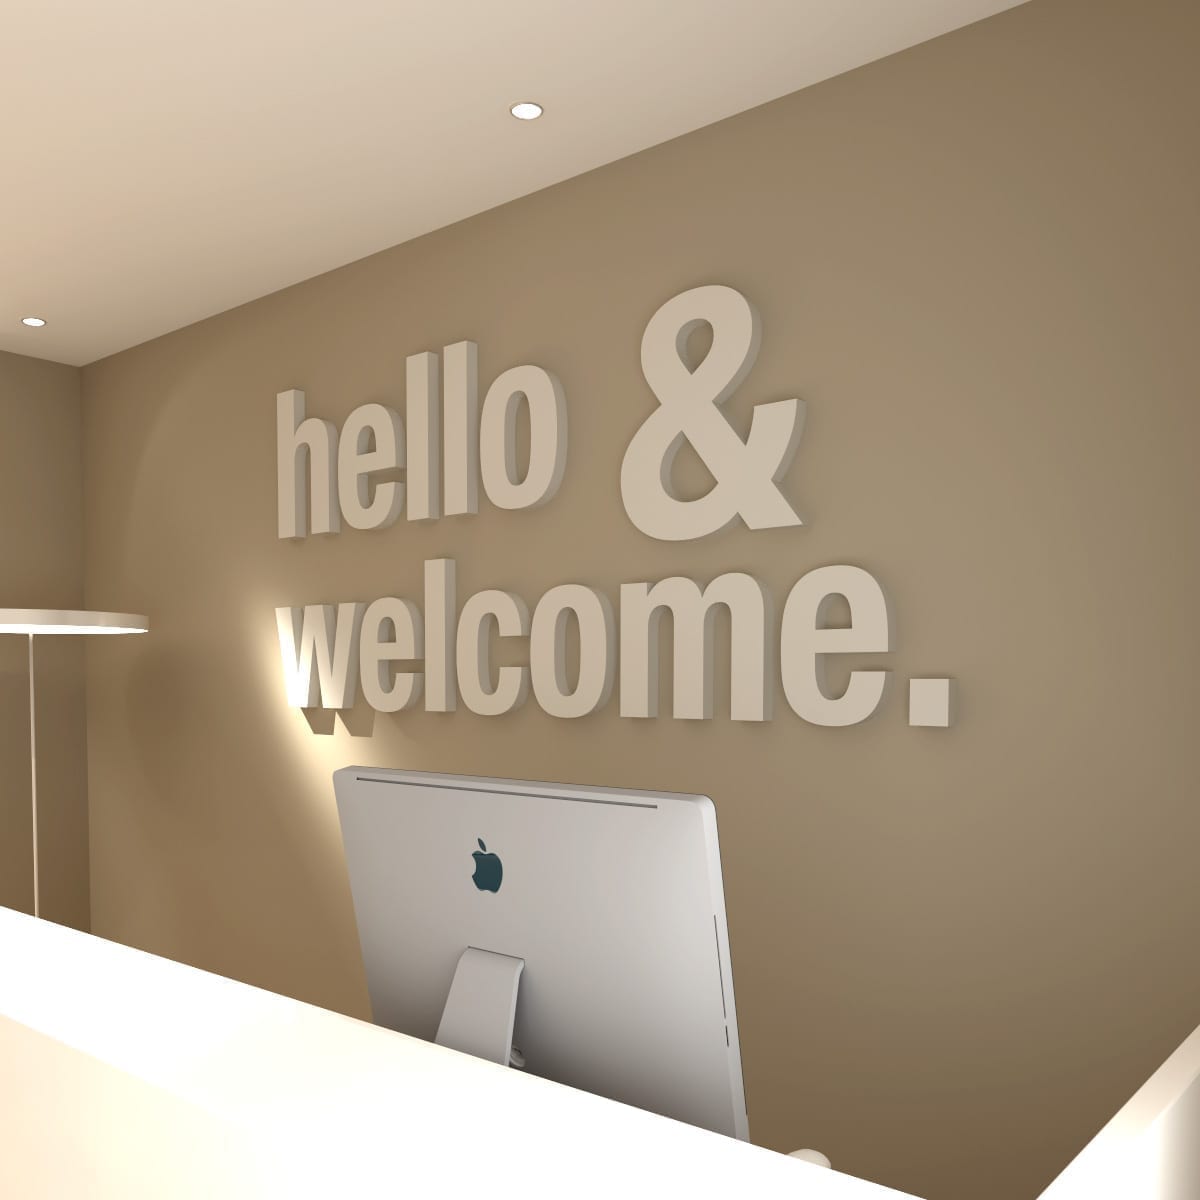 Hello & Welcome Office Design 3D